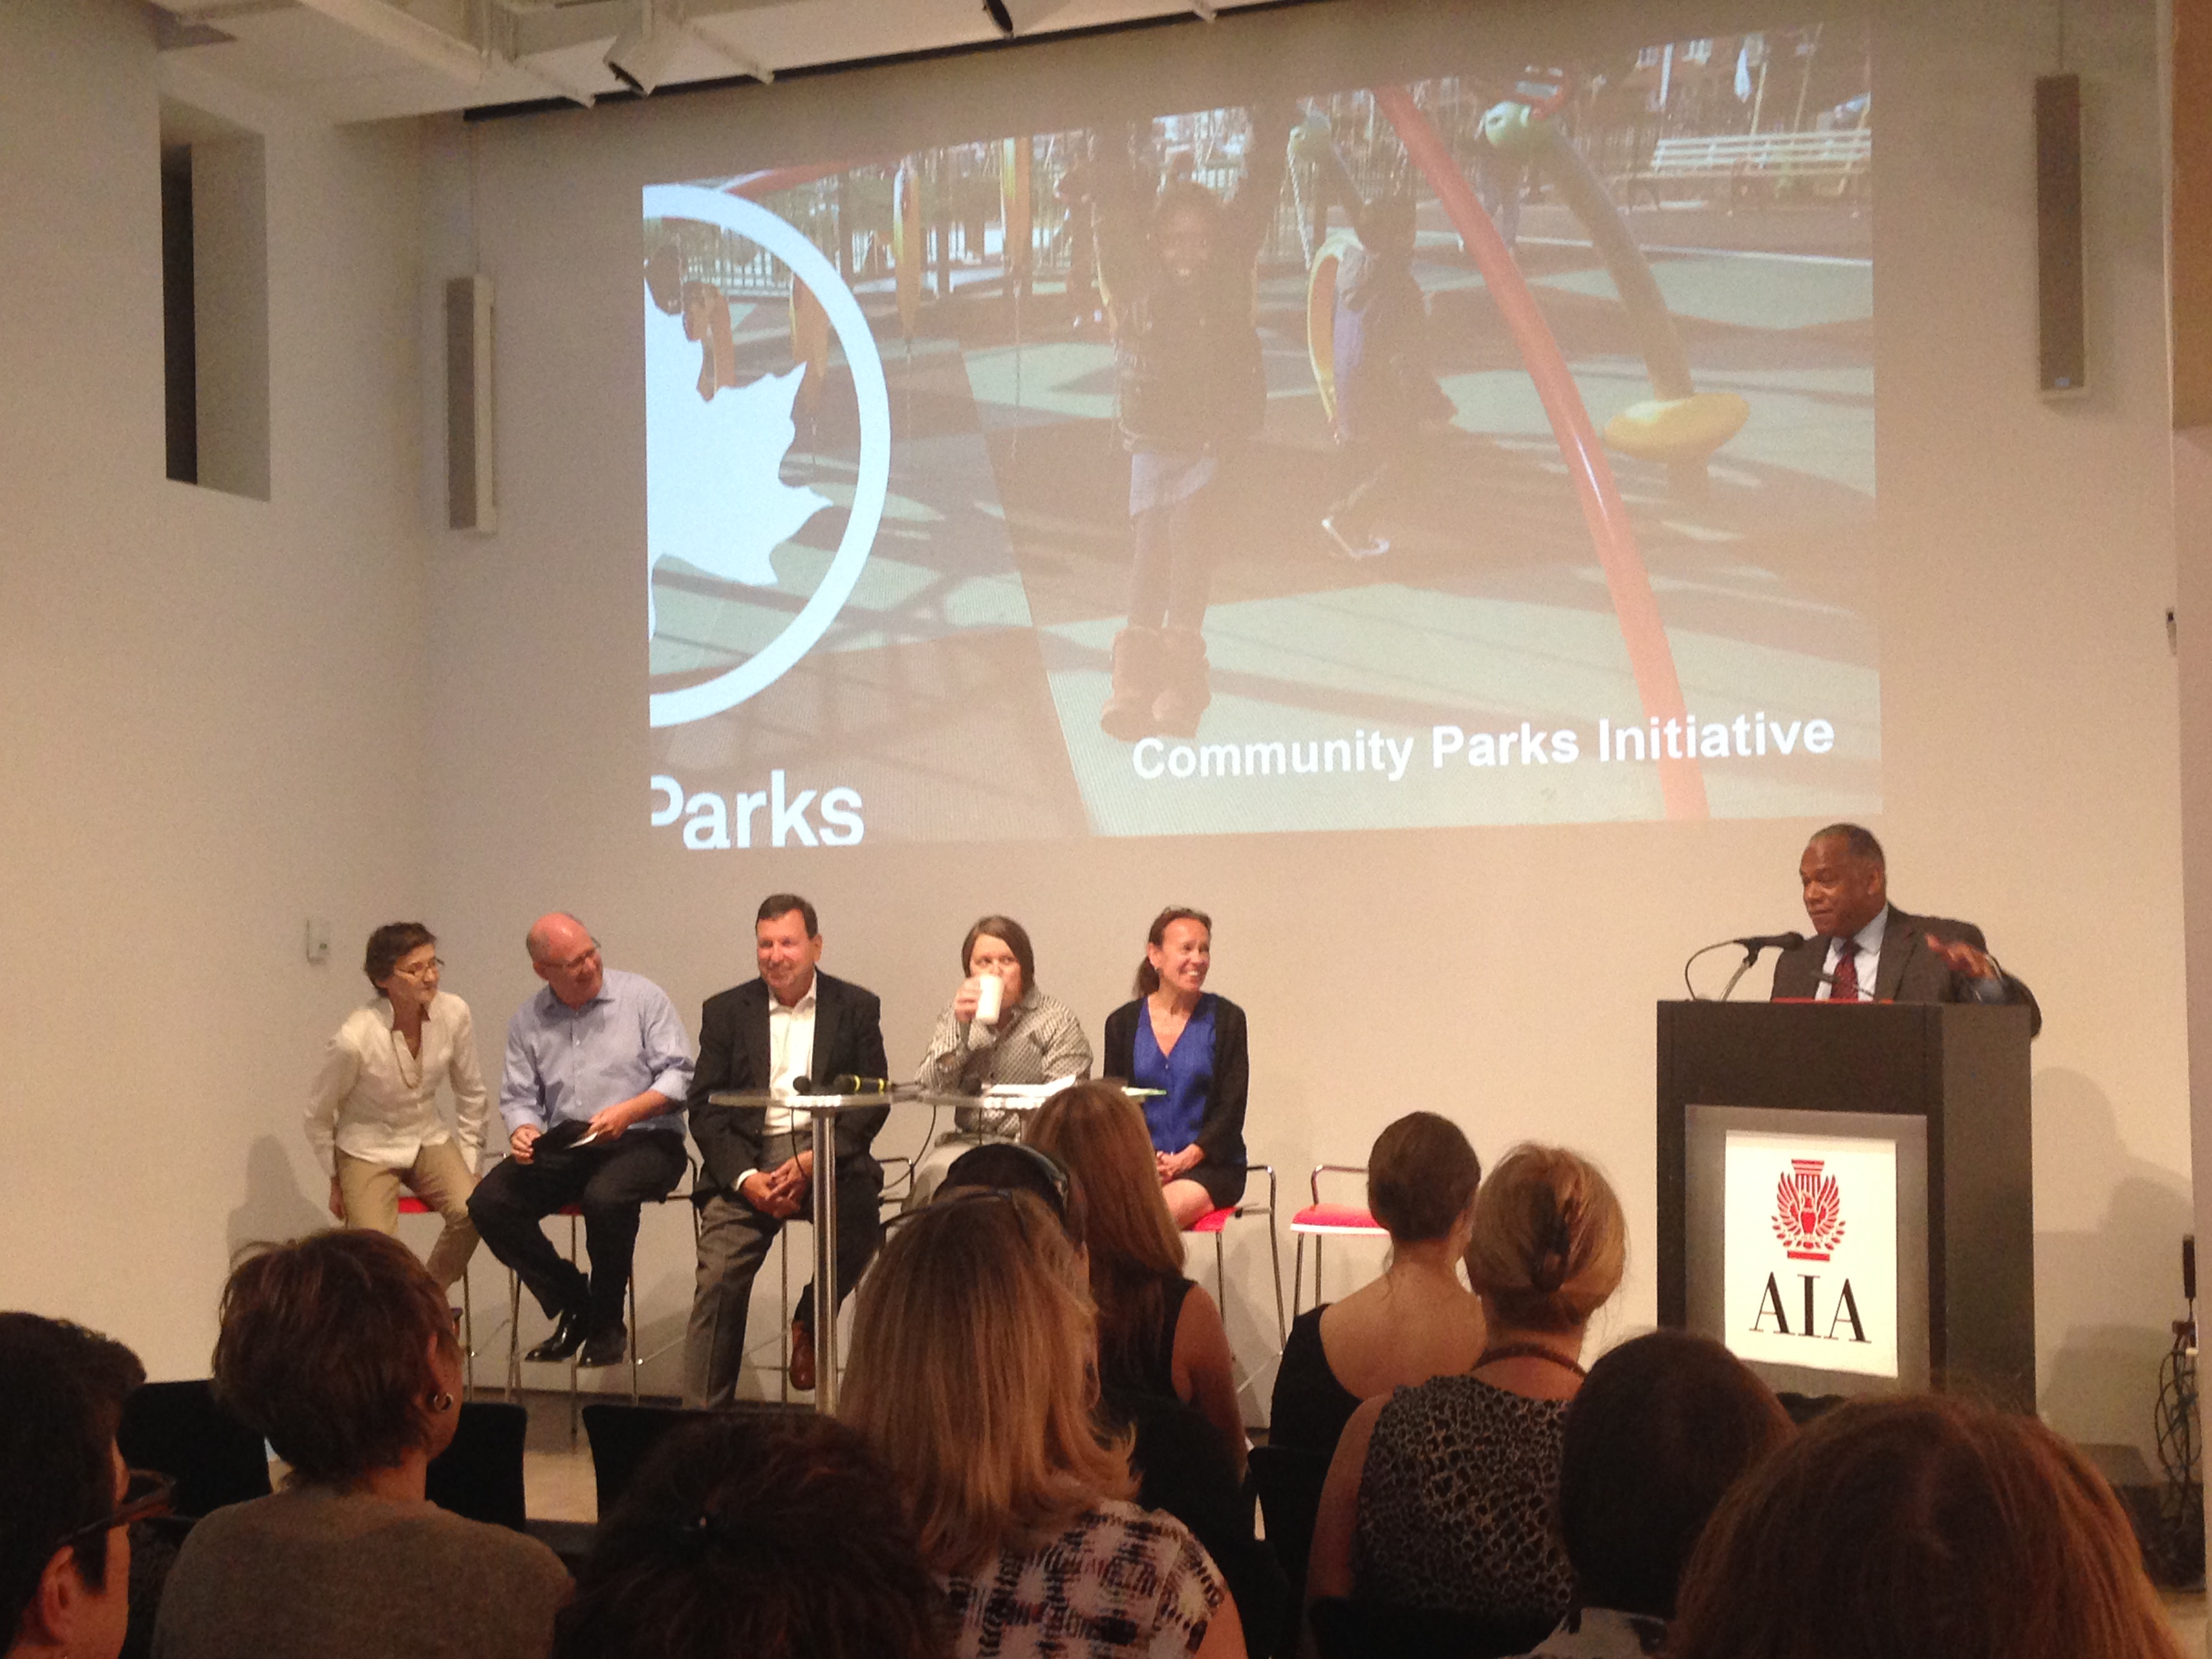 Equity in Process and Design: The Community Parks Initiative